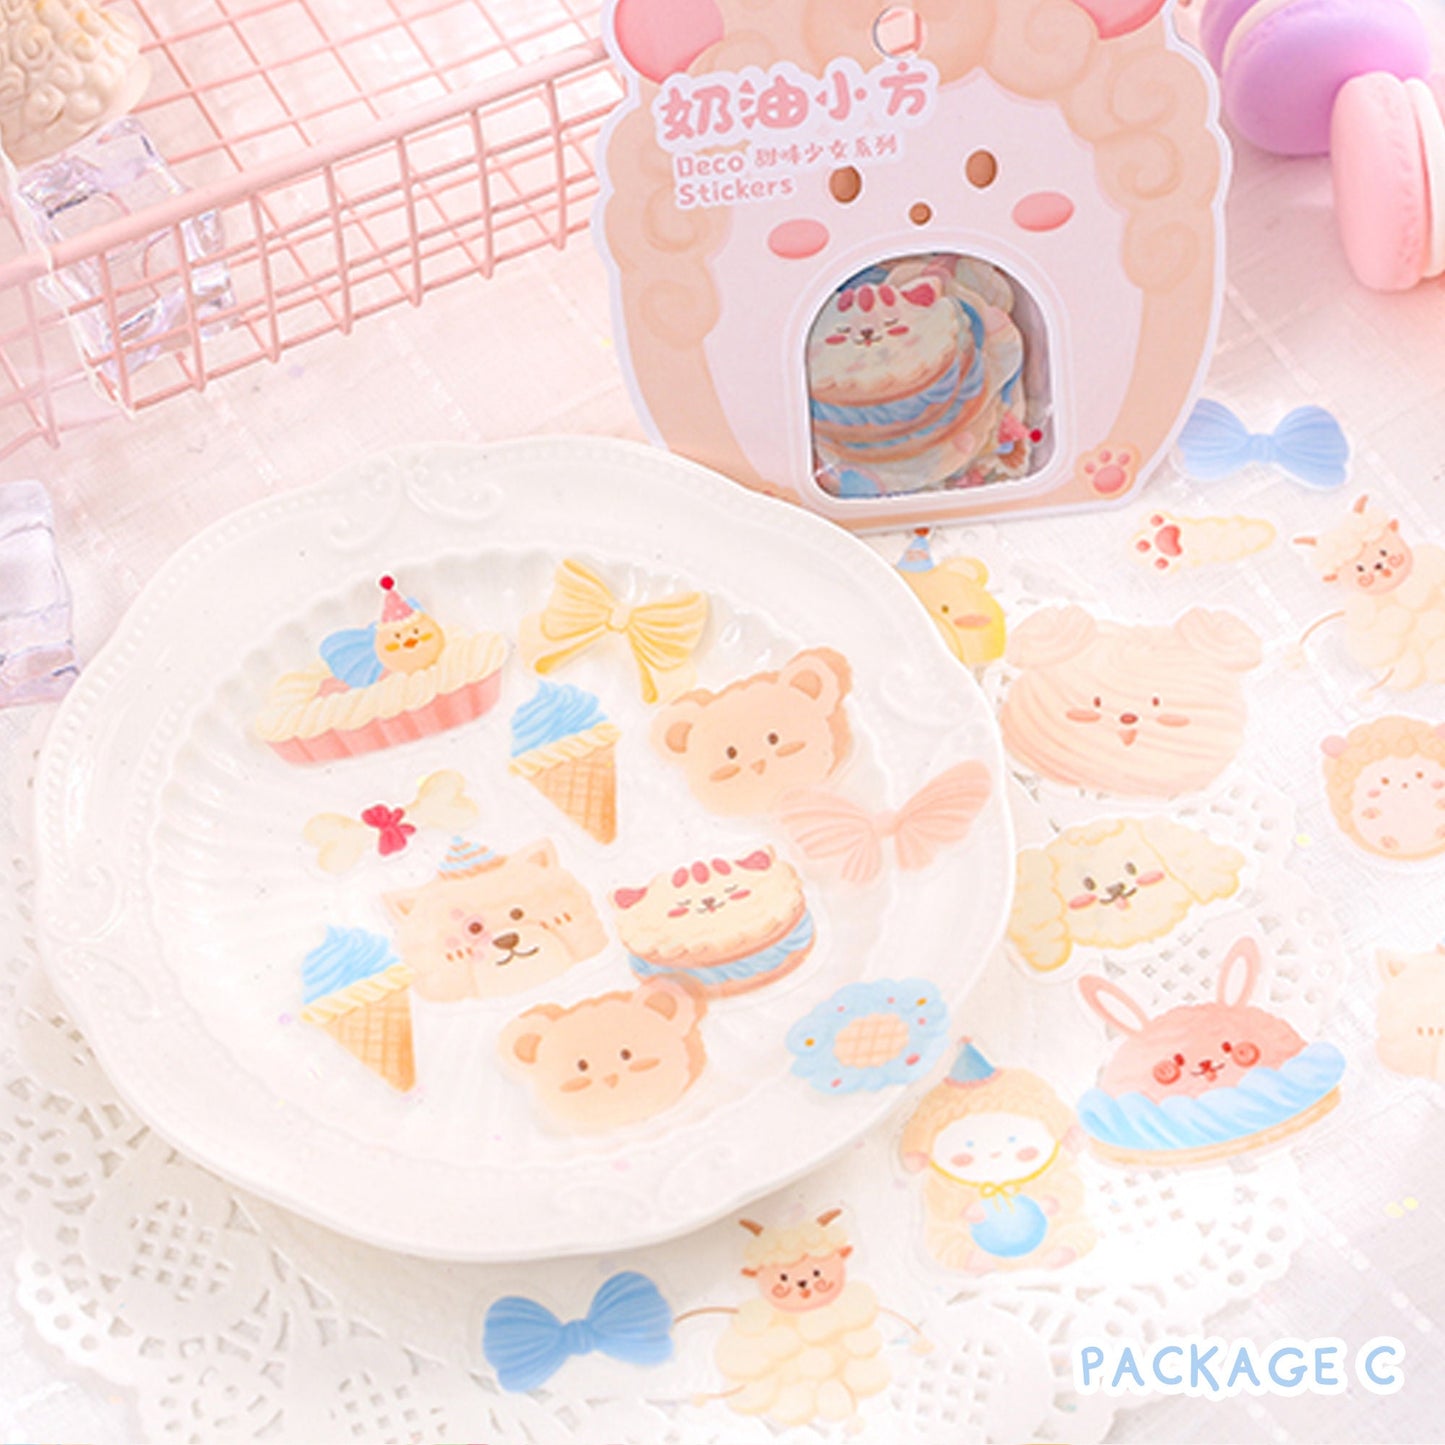 Kawaii Pastry Stickers - Cute Stickers - Treat Stickers - Kawaii Stickers - Frosting Stickers - Journal Flakes Stickers, Clear Stickers B3C